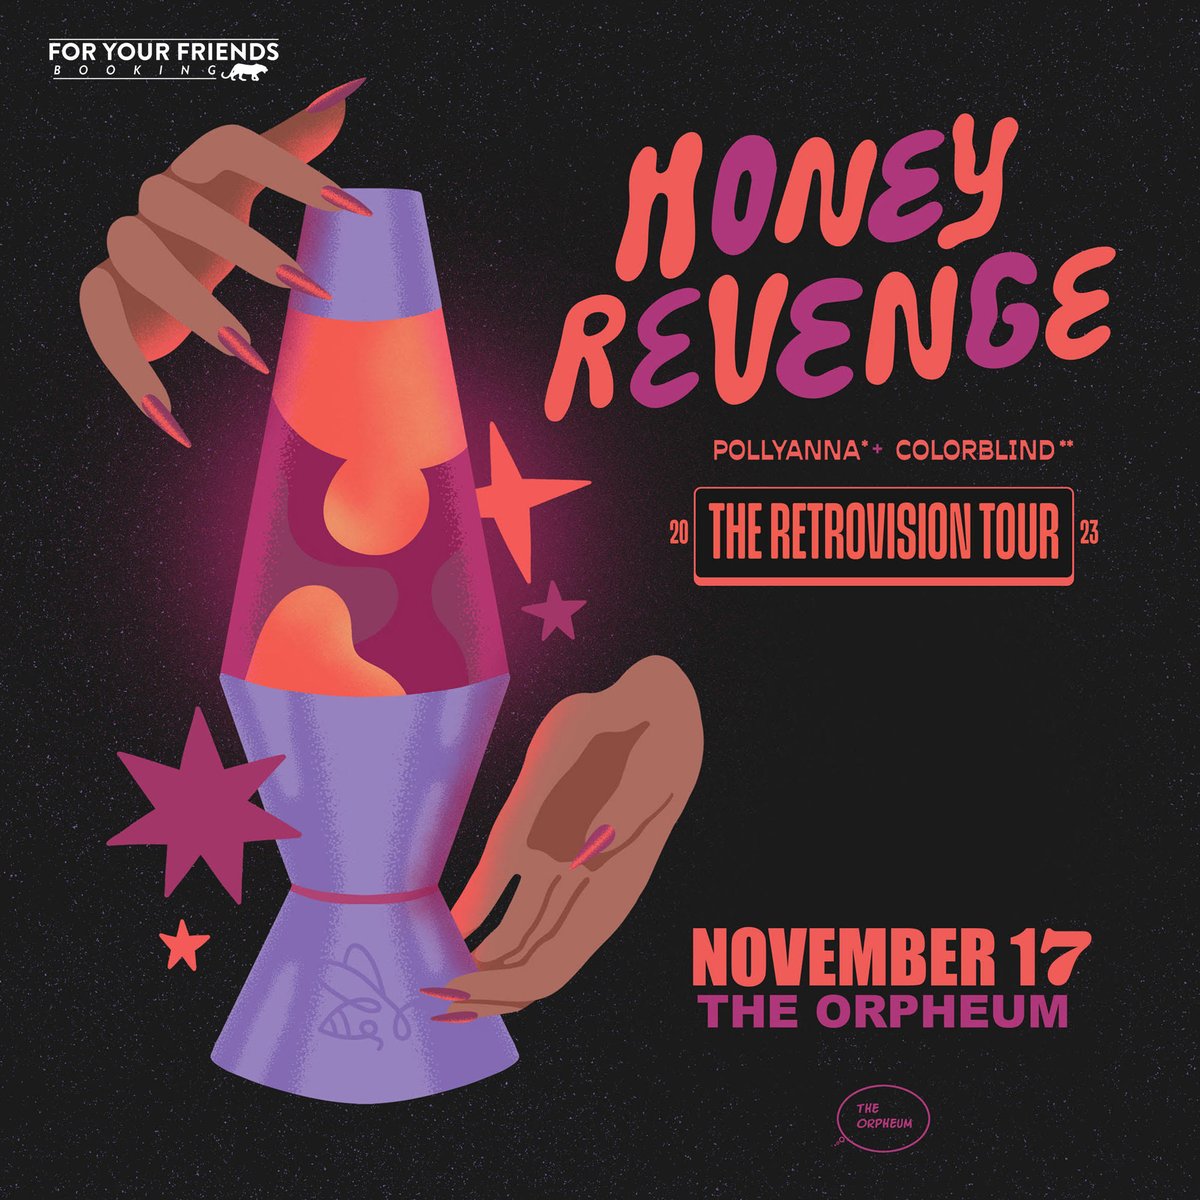 In case you missed it: @honeyrevengeca w/ @pollyannanj @colorblindtx hits @TAMPAOrpheum on November 17th. Tickets available at theorpheum.com